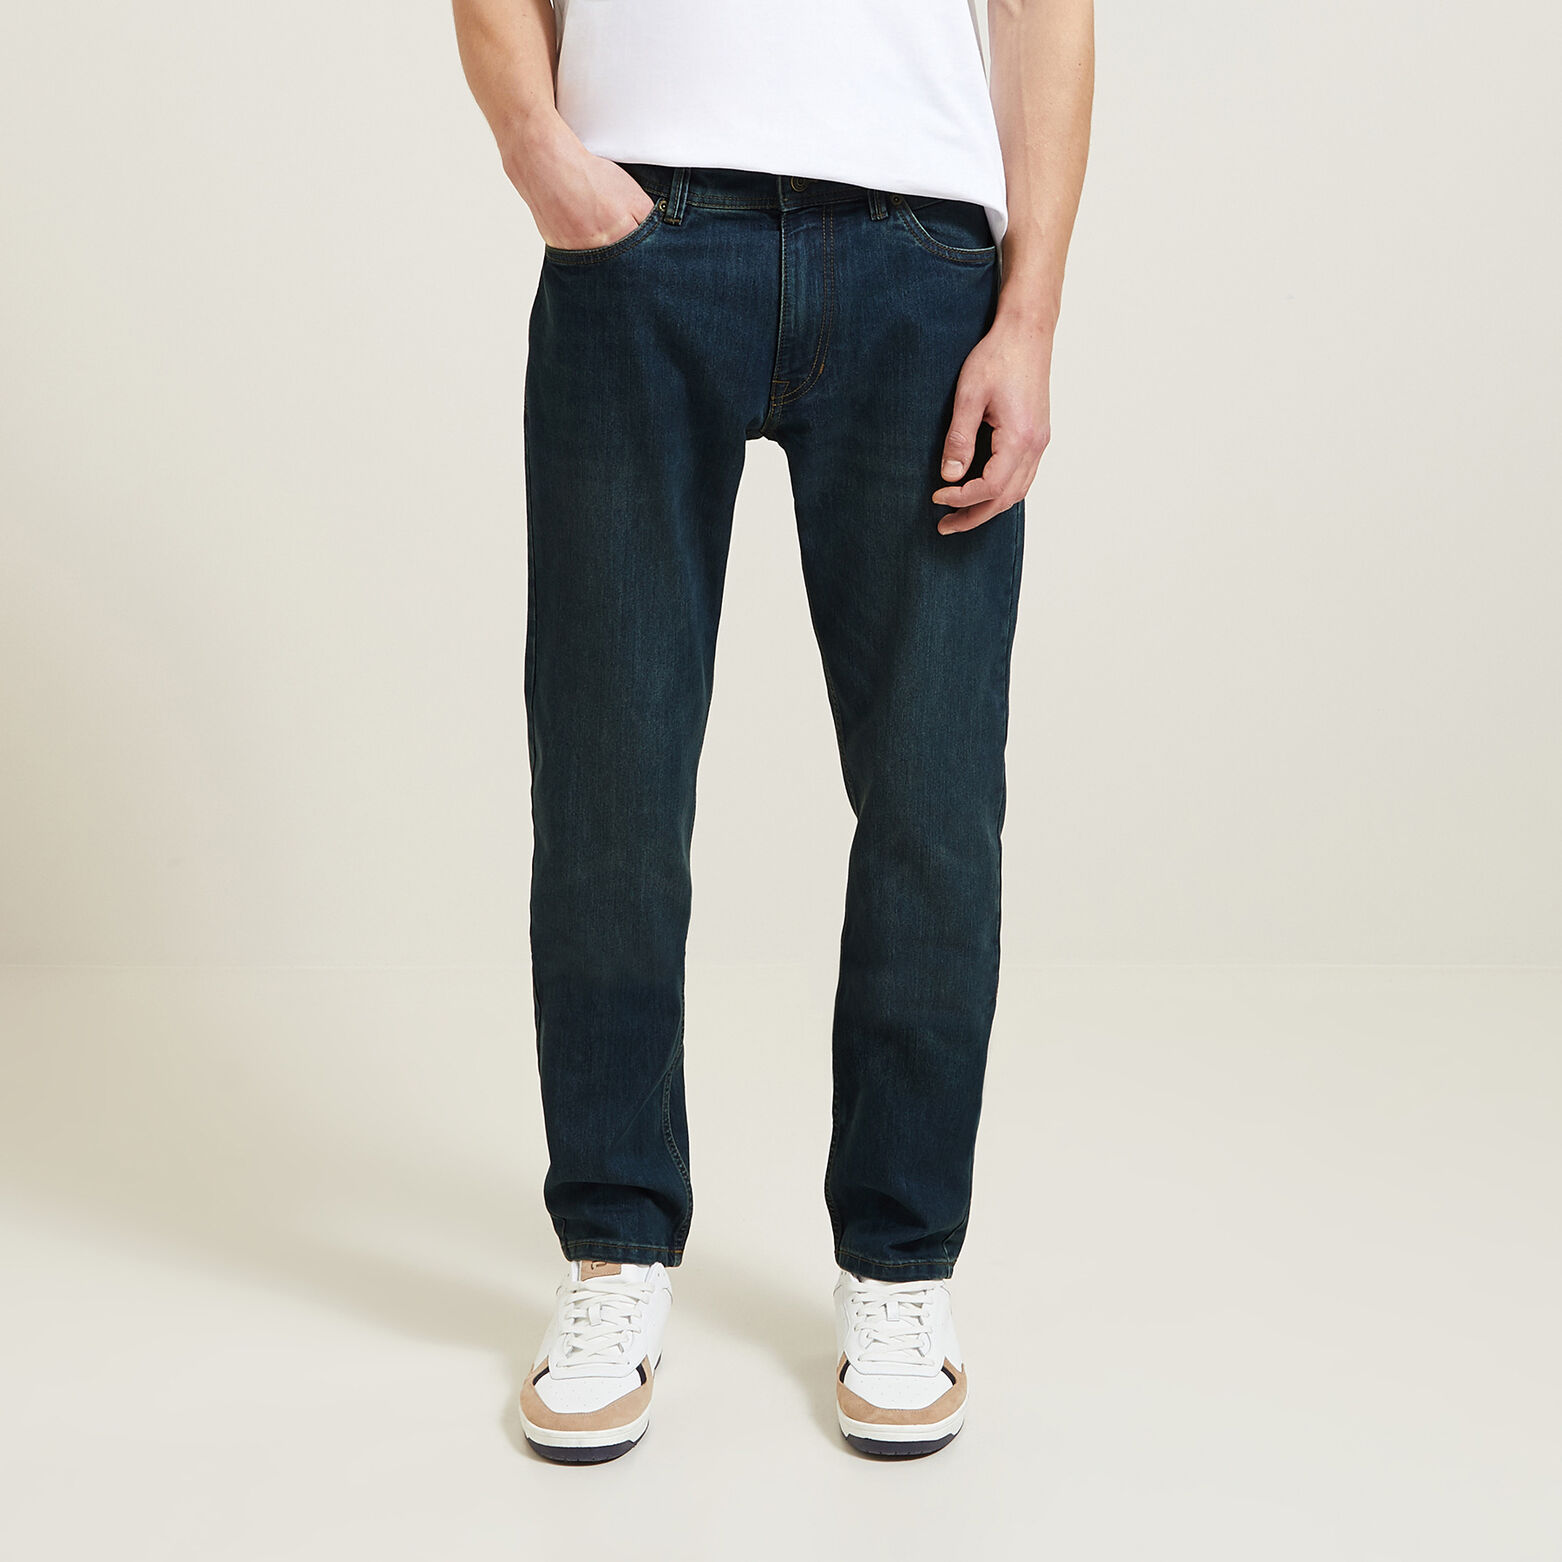 Jean straight 4 longueurs coton polyester recyclés